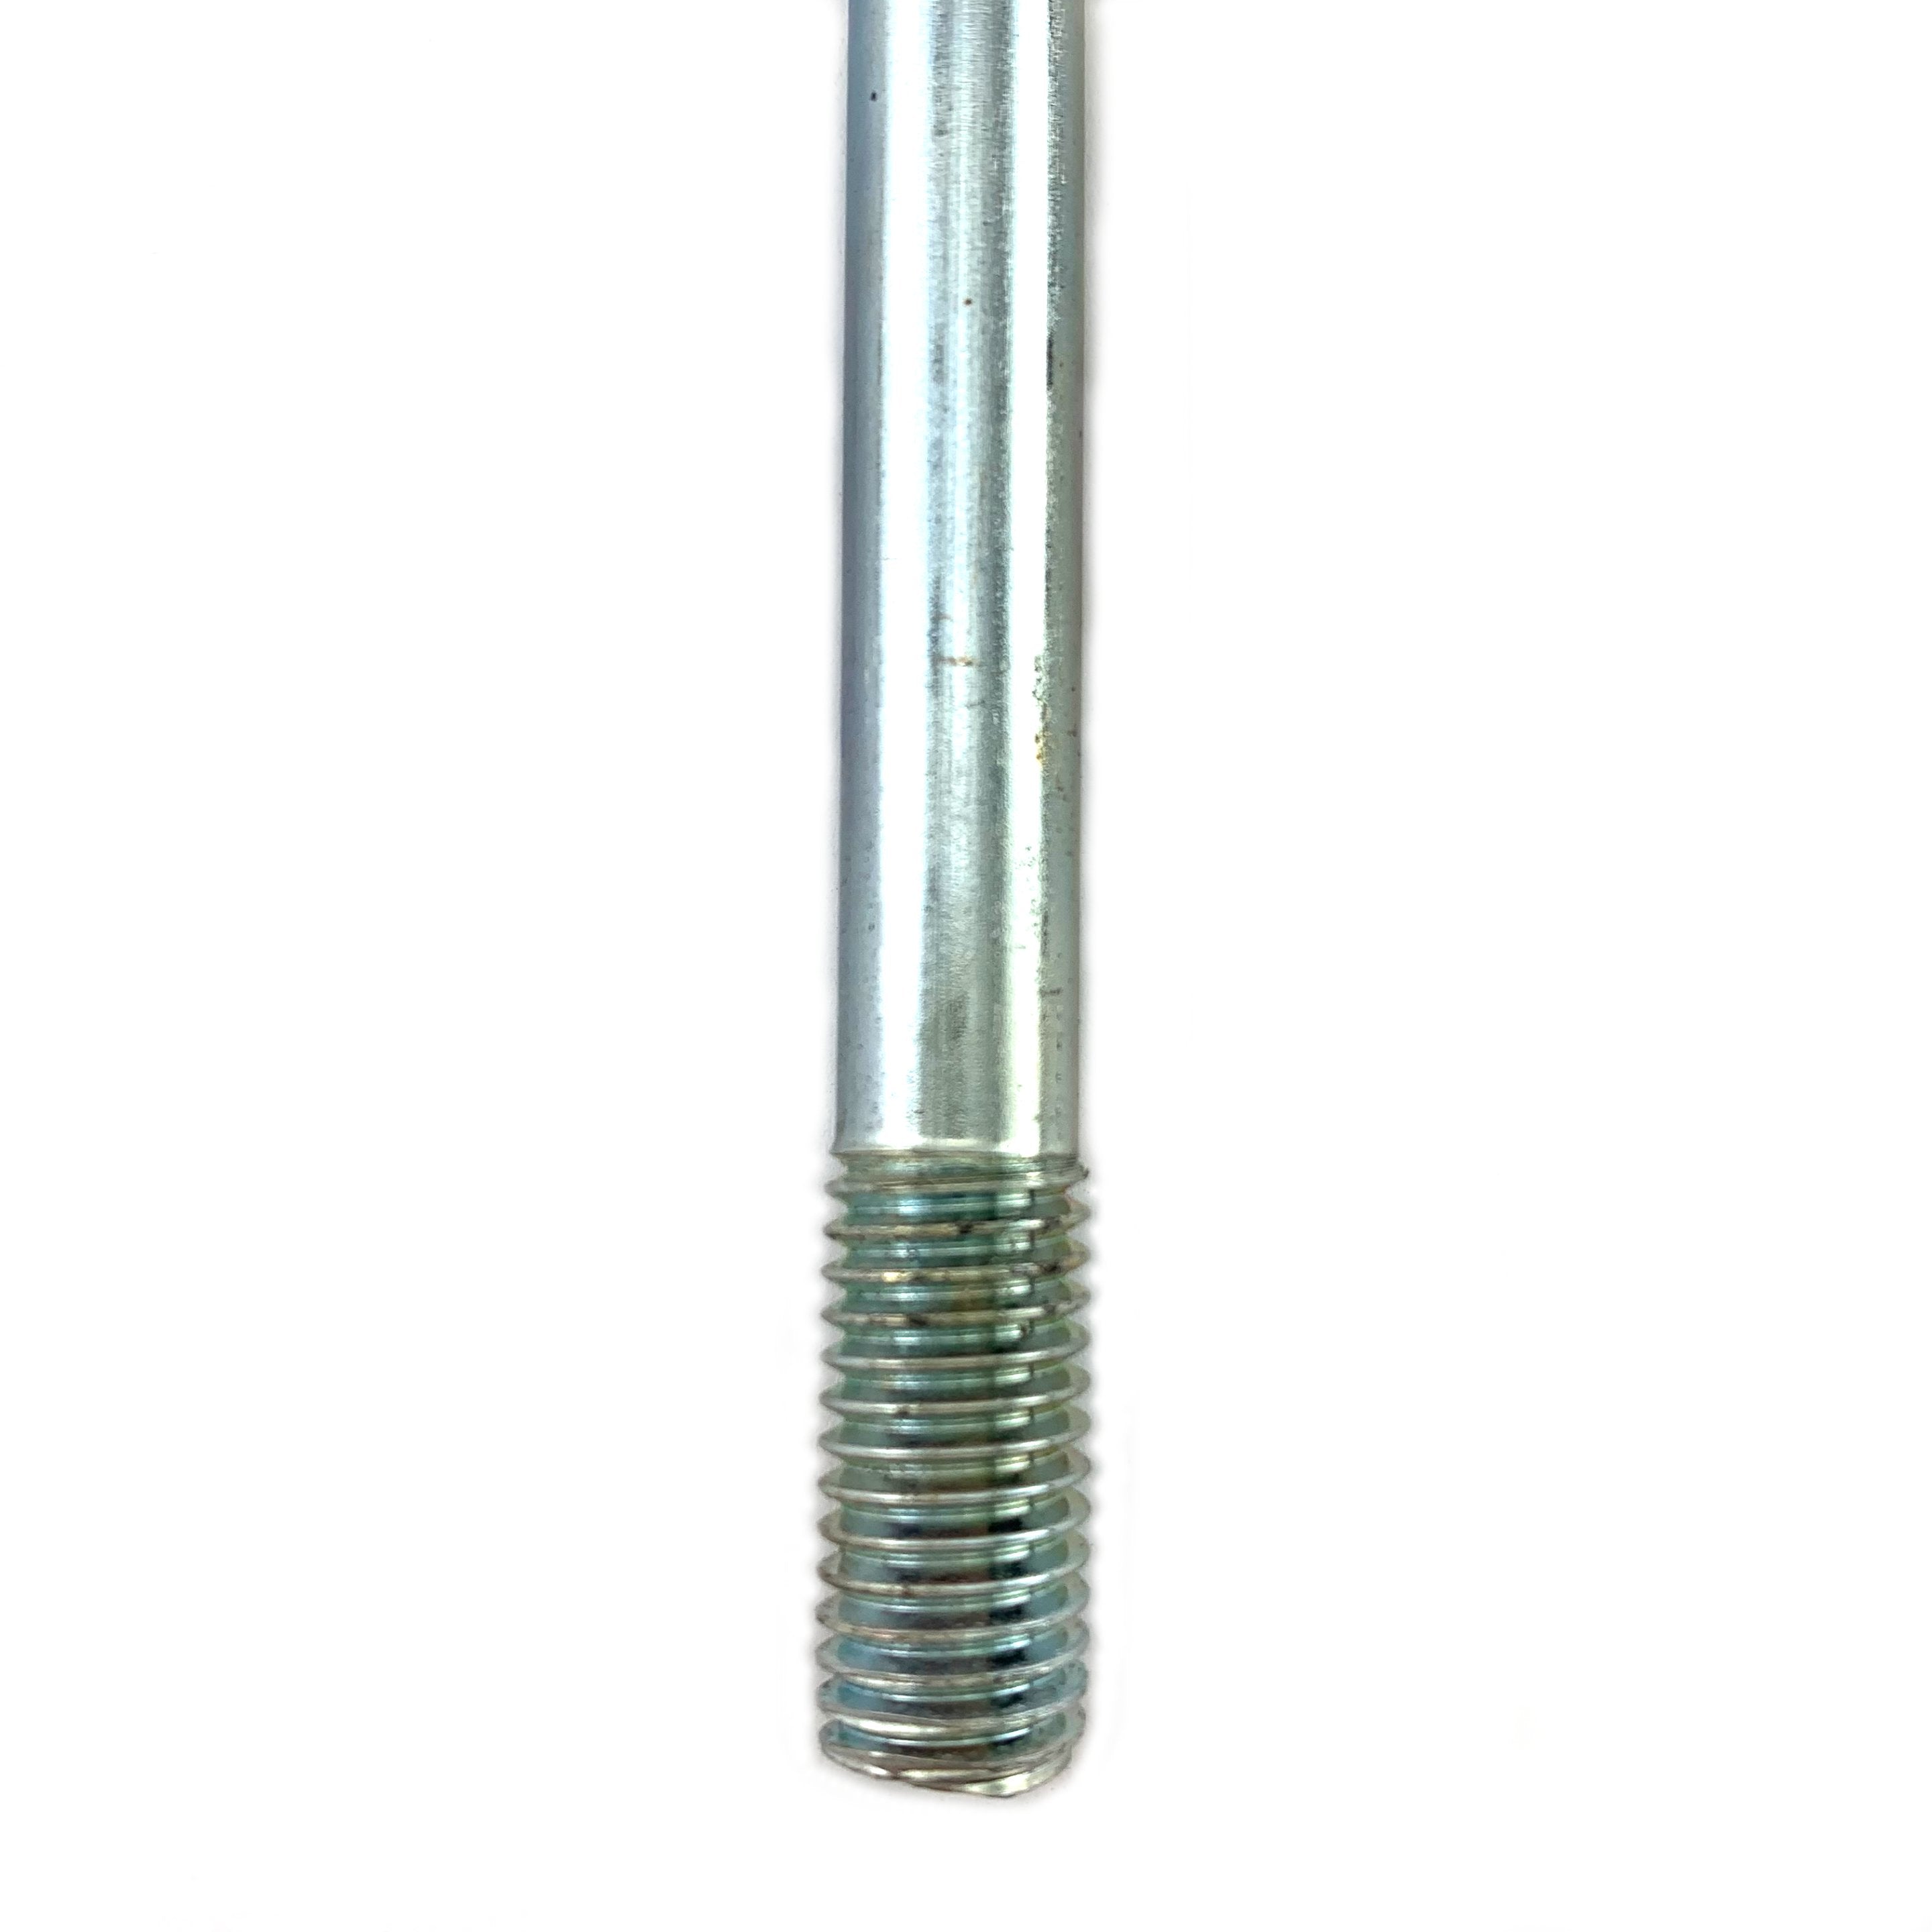 Threaded rod, zinc plated, 10mm thread, 9mm wire. Includes 2 nuts. Melbourne, Australia.